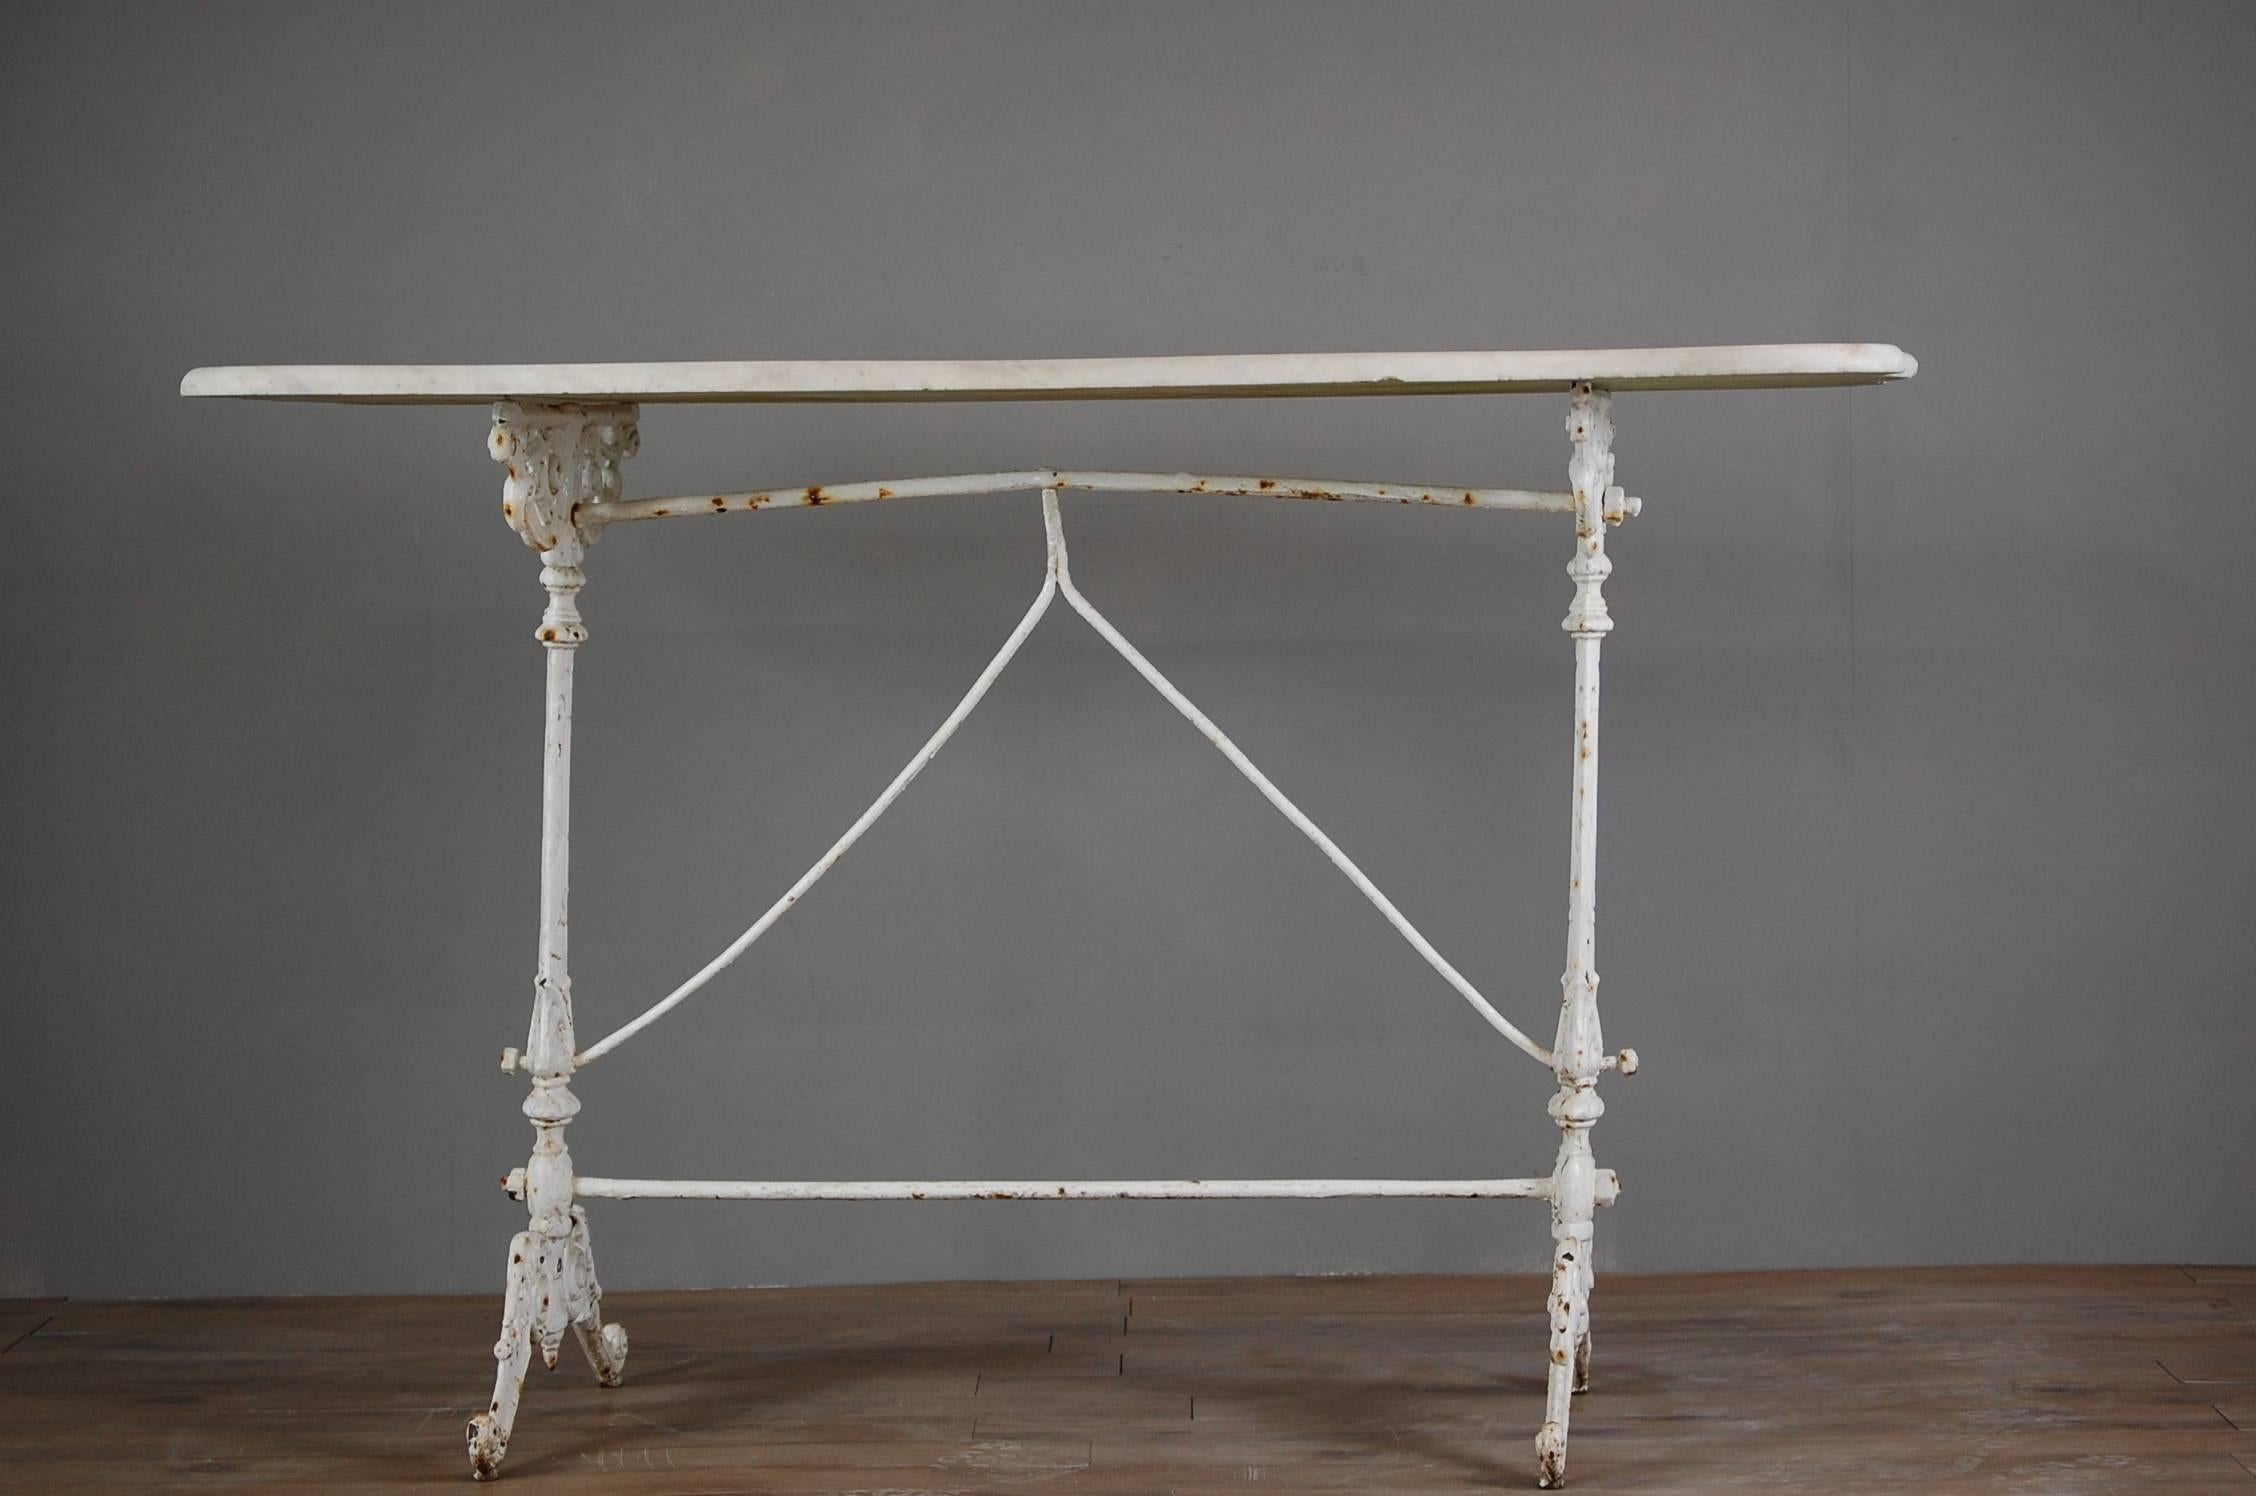 Early 20th century English cast iron, marble top orangery table. Detail intricate casting of the base with layers of old chippy paint. The marble top is drilled to secure in place on the base. The wavy edged marble is wonderfully decorative, with a